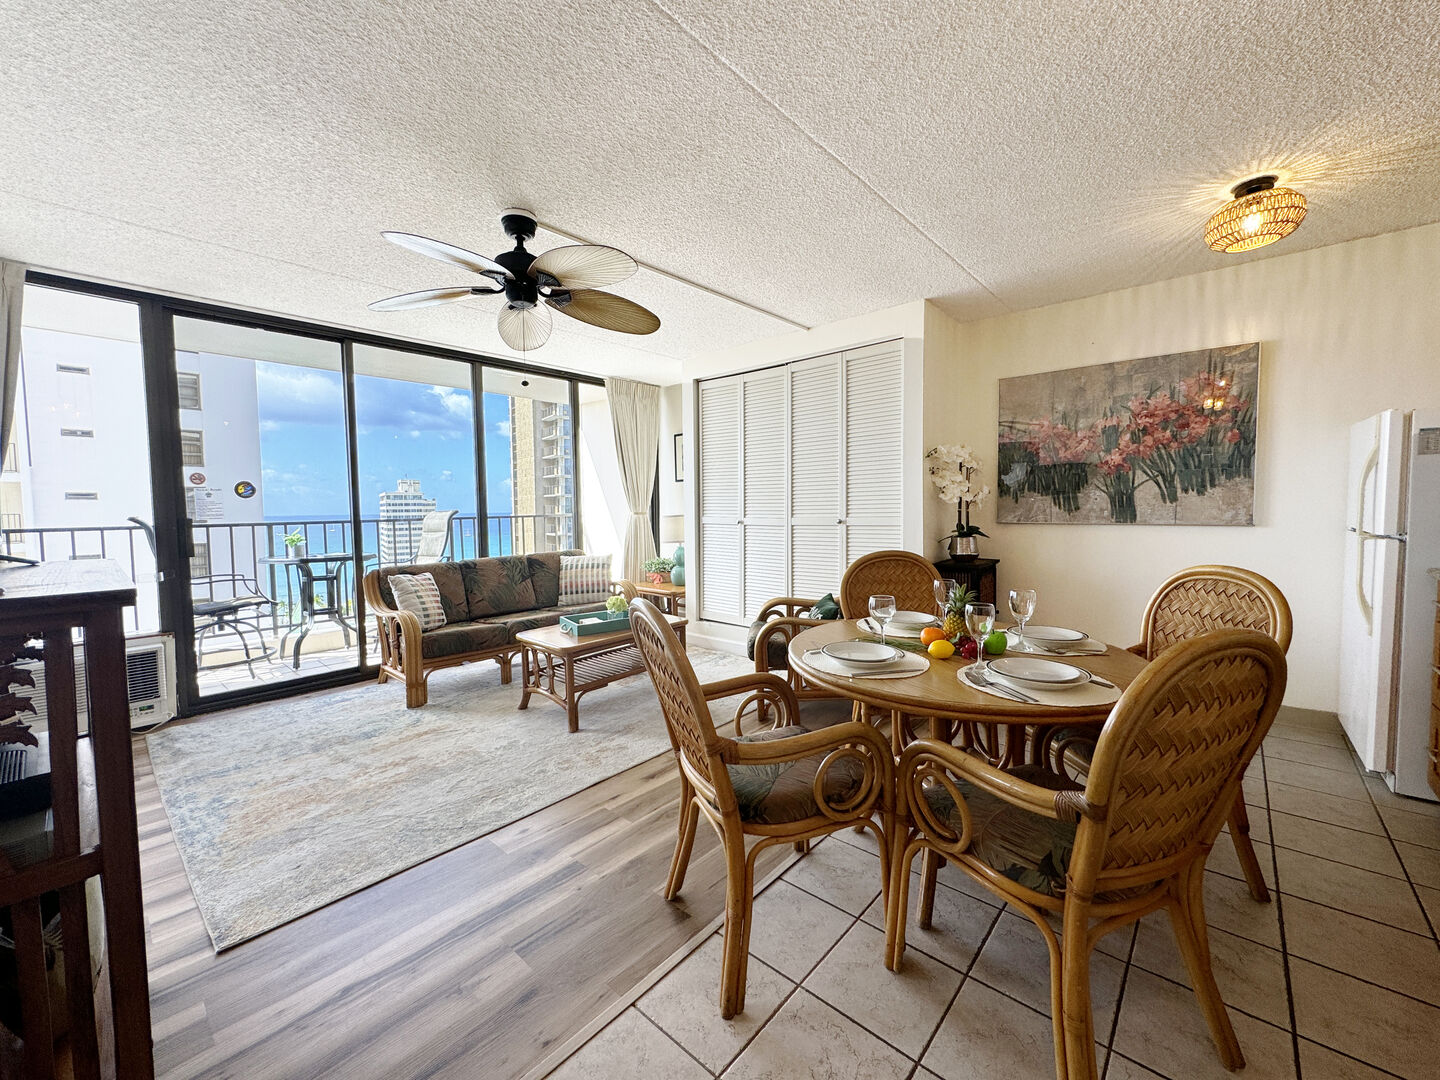 The dining area has a dining table with 4 chairs and with a beautiful ocean view.